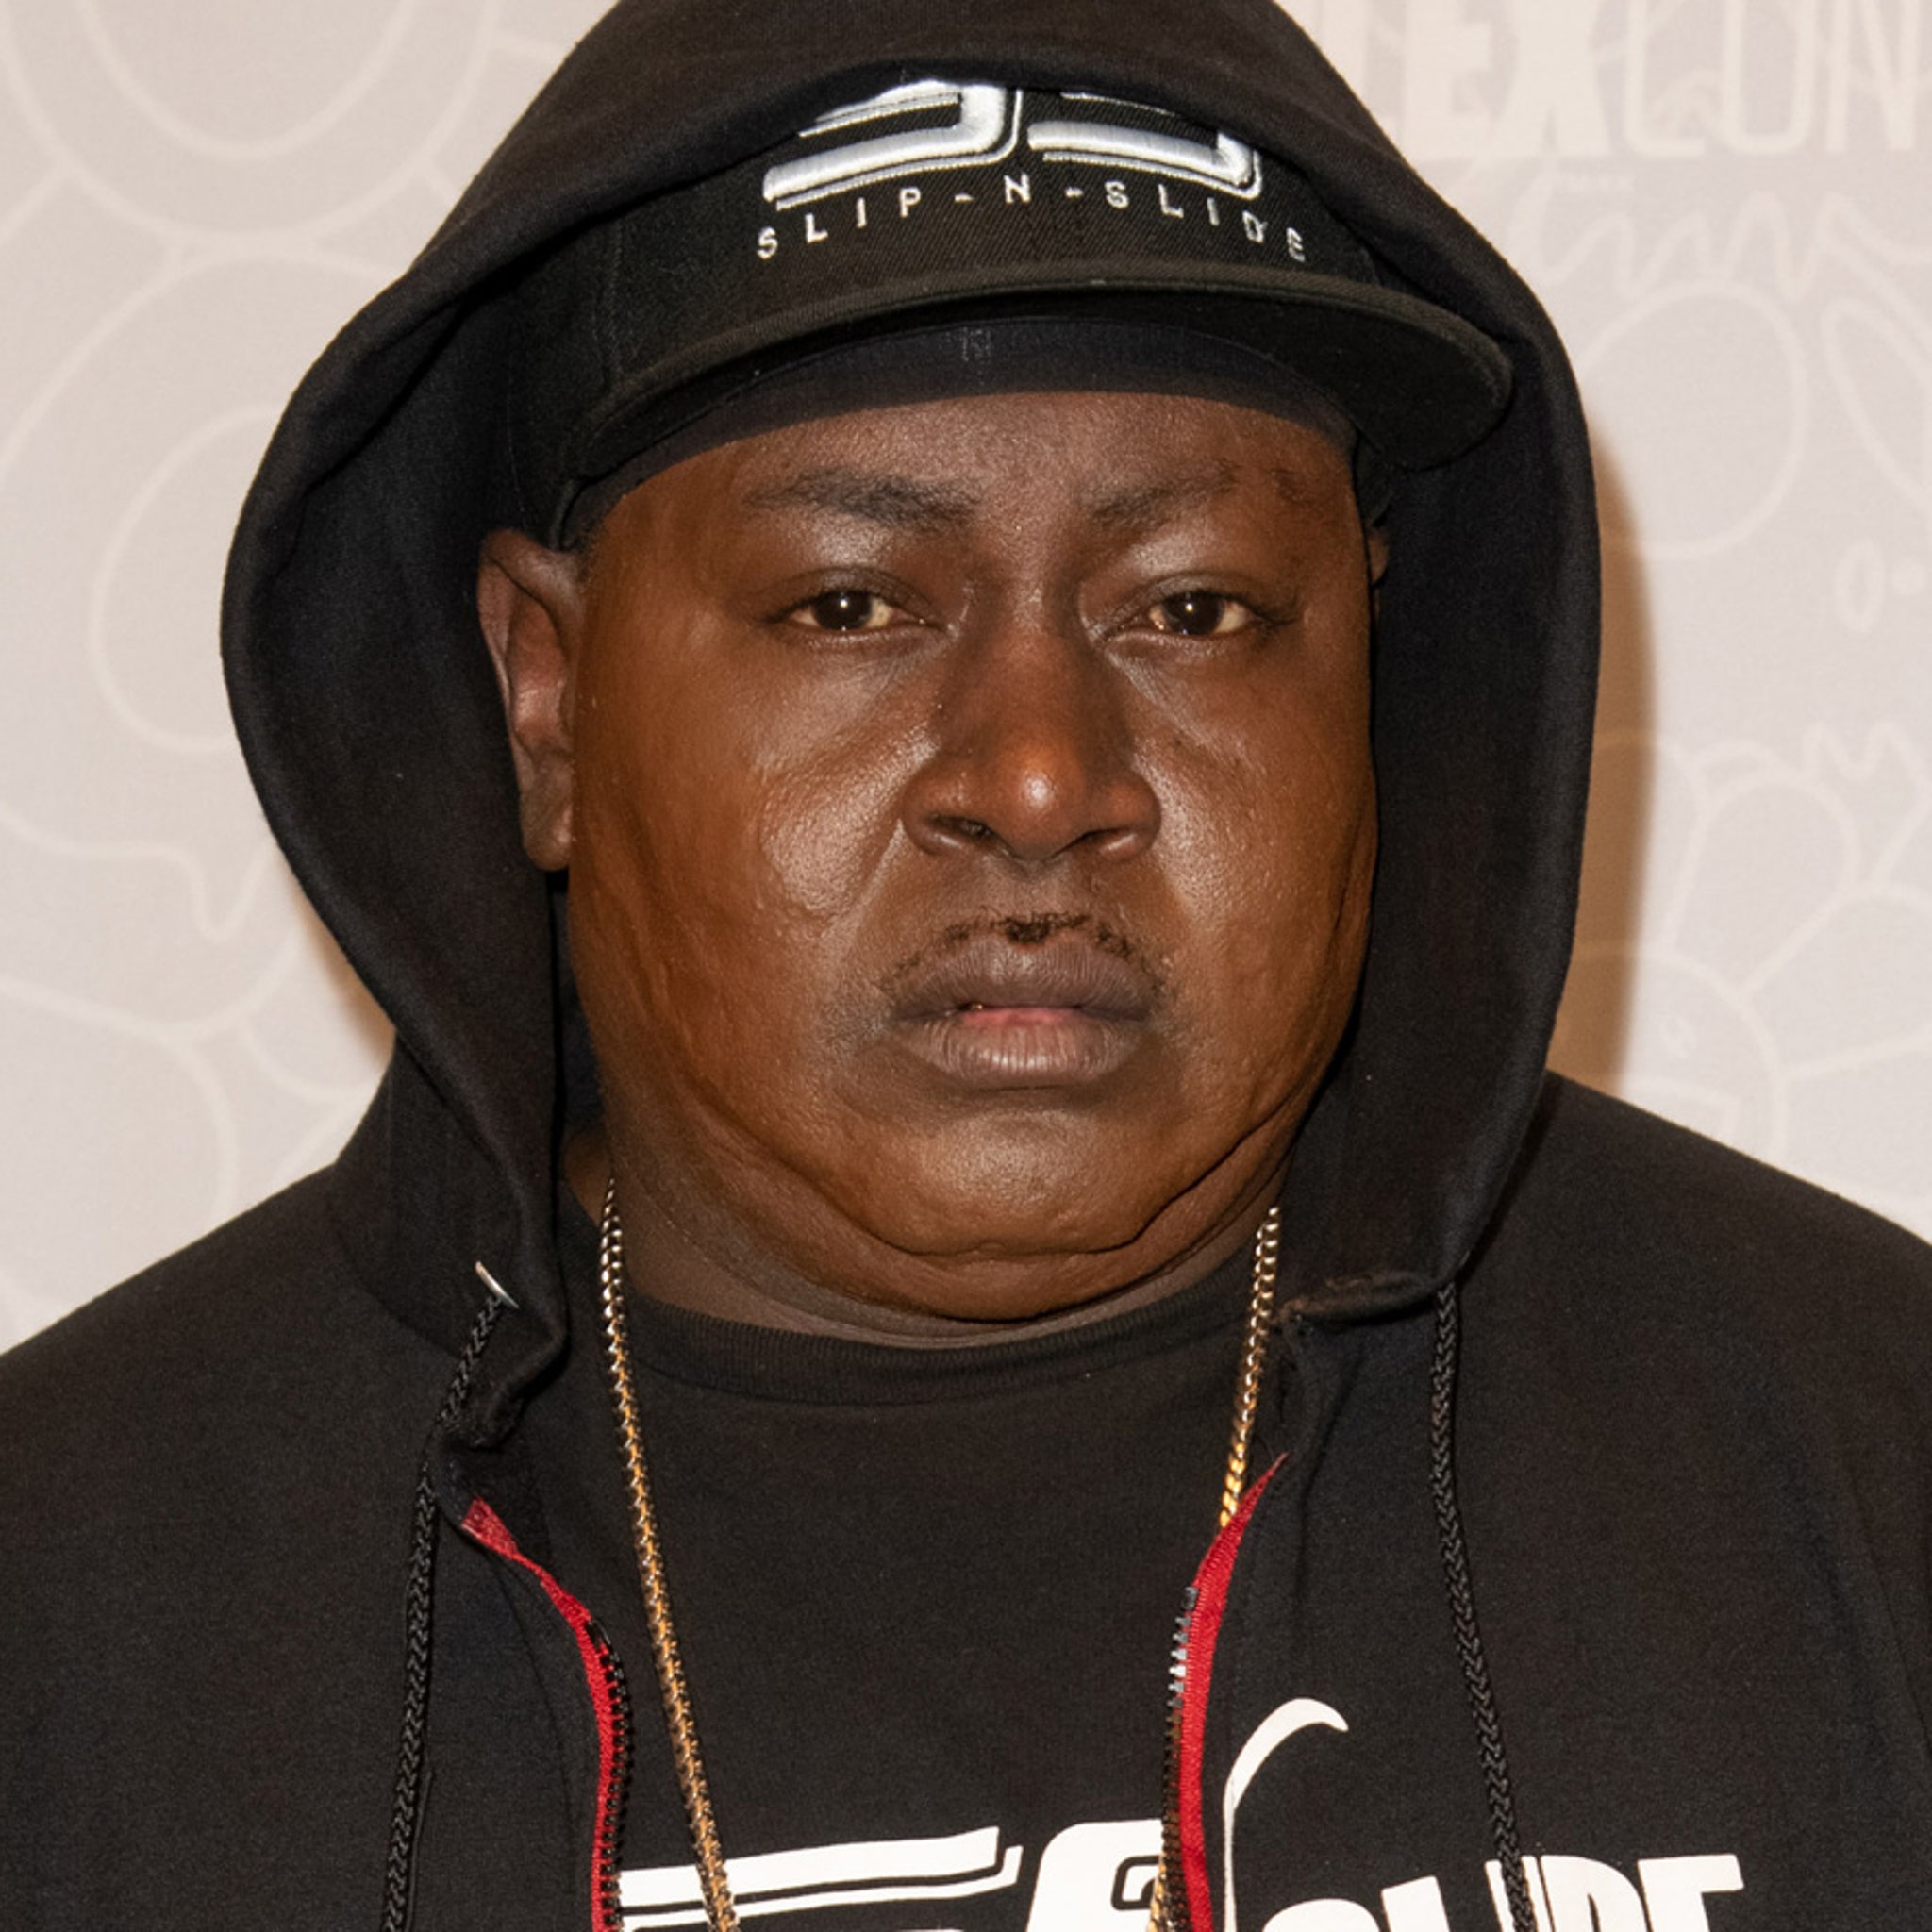 Related image of Trick Daddy.